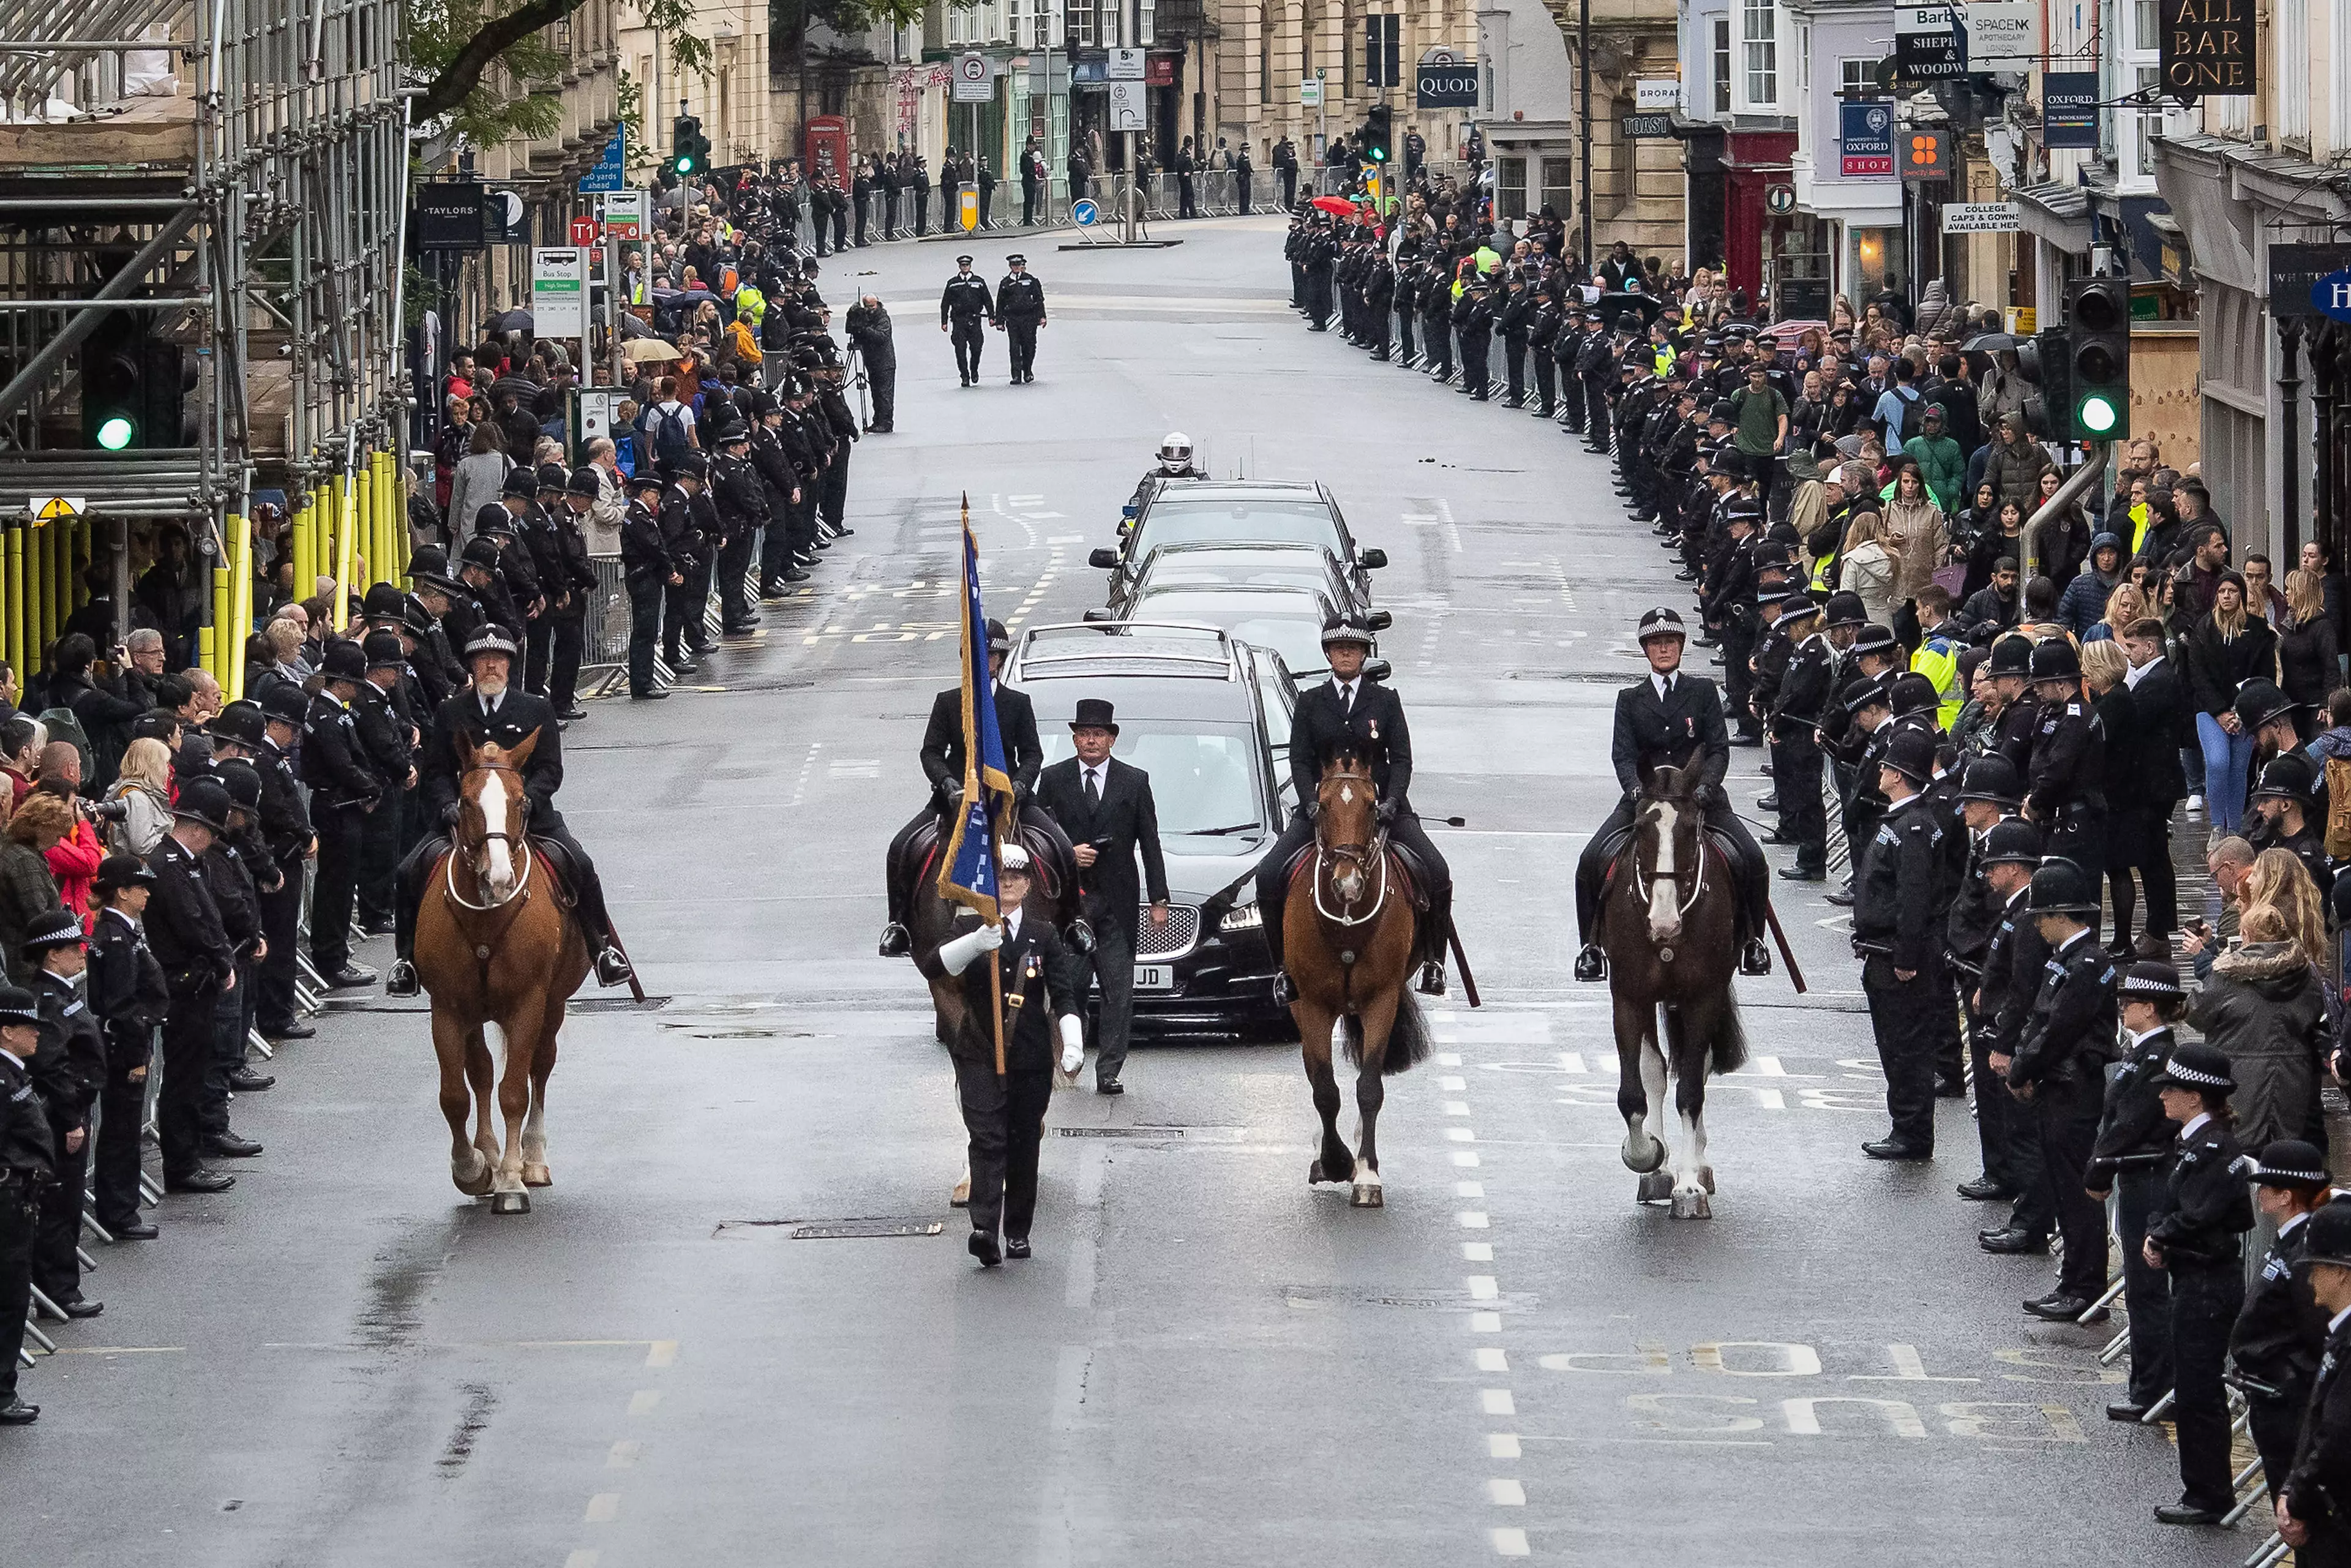 Hundreds lined the streets for the funeral of PC Harper in Oxford today, 14th October. (